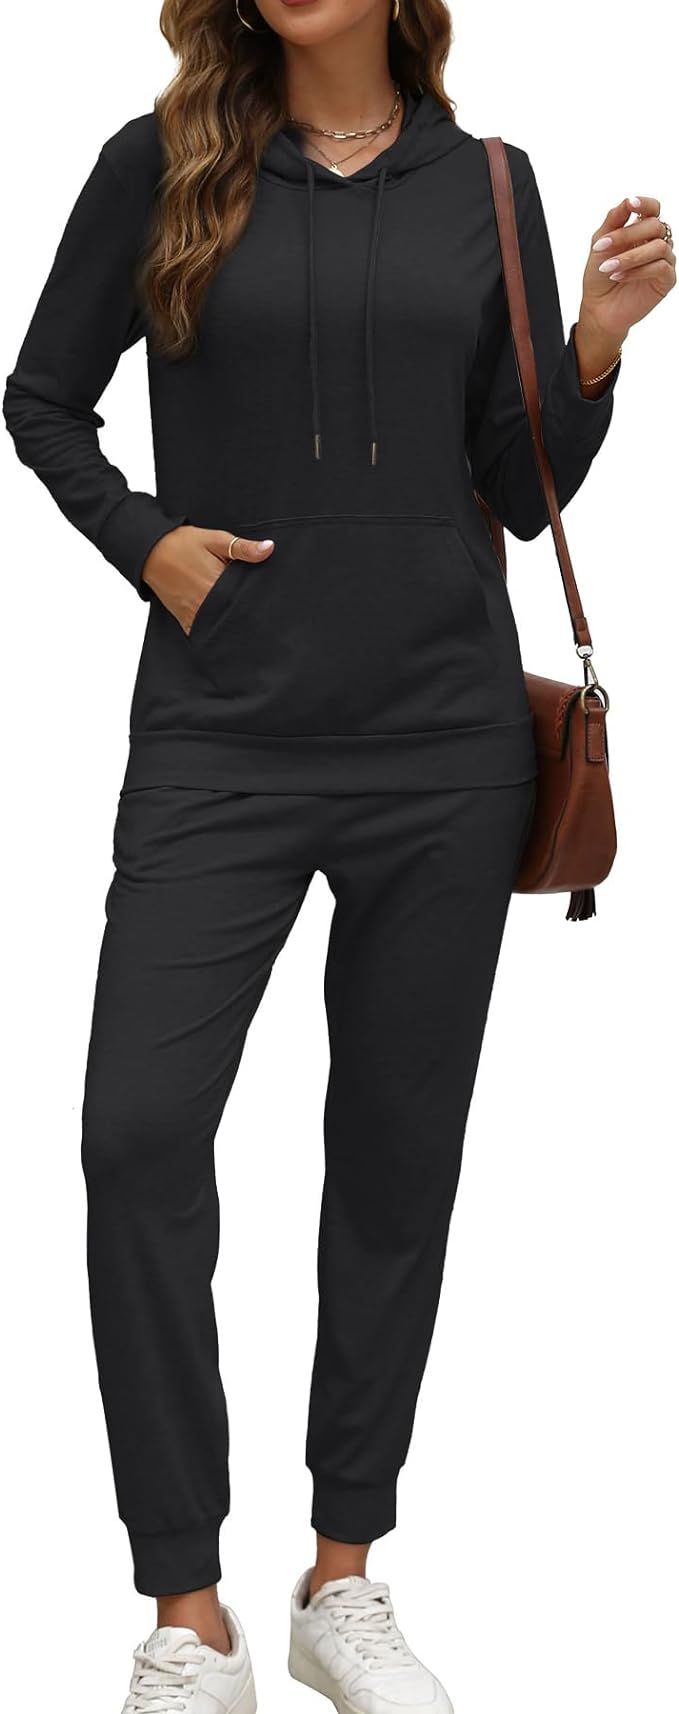 addigi Womens Two Piece Tracksuit Outfits Hoodies Jogger Sweatsuit Lounge Sets with Pockets | Amazon (US)